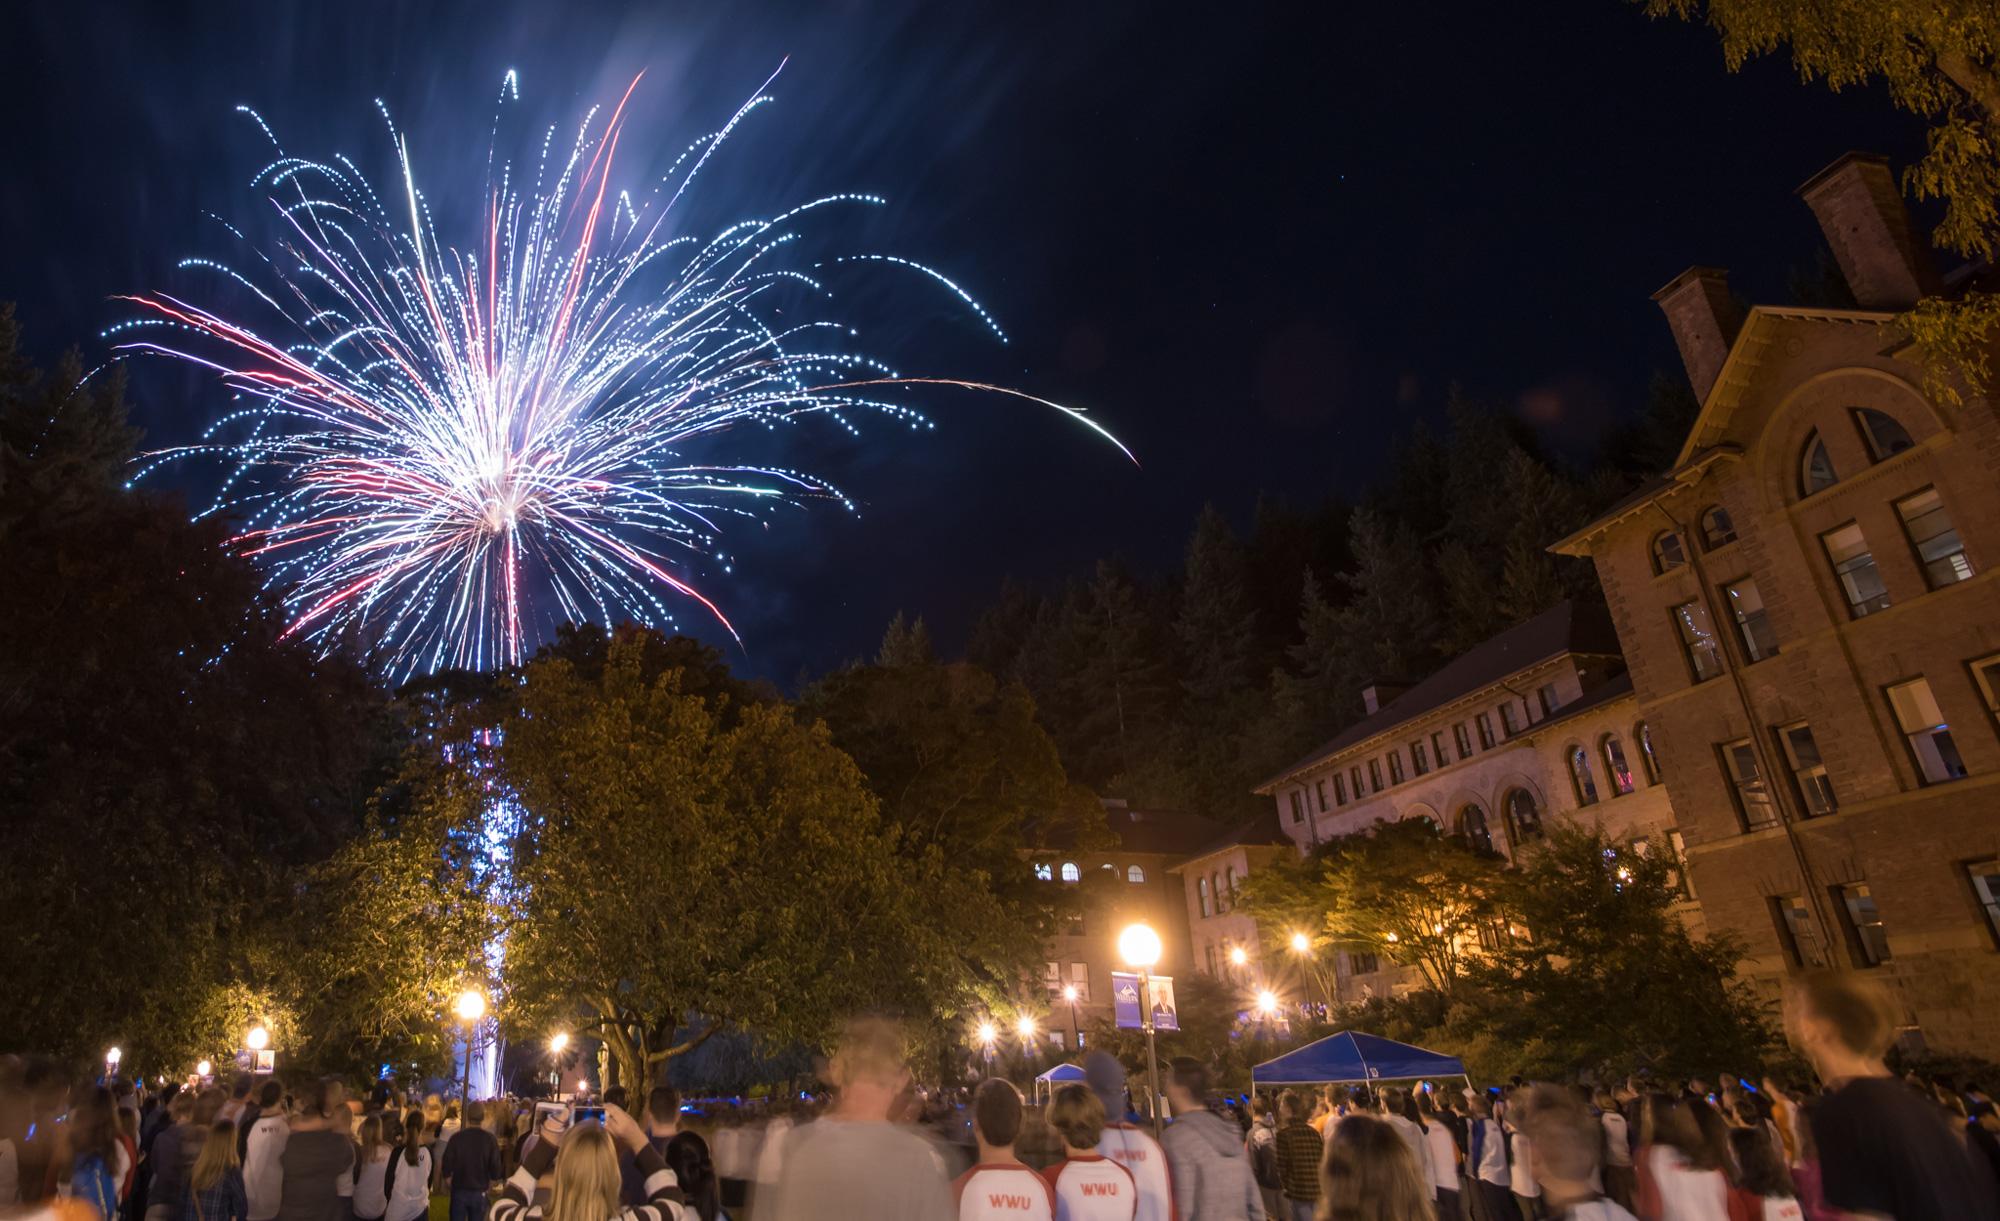 Fireworks light up the sky in front of Old Main.